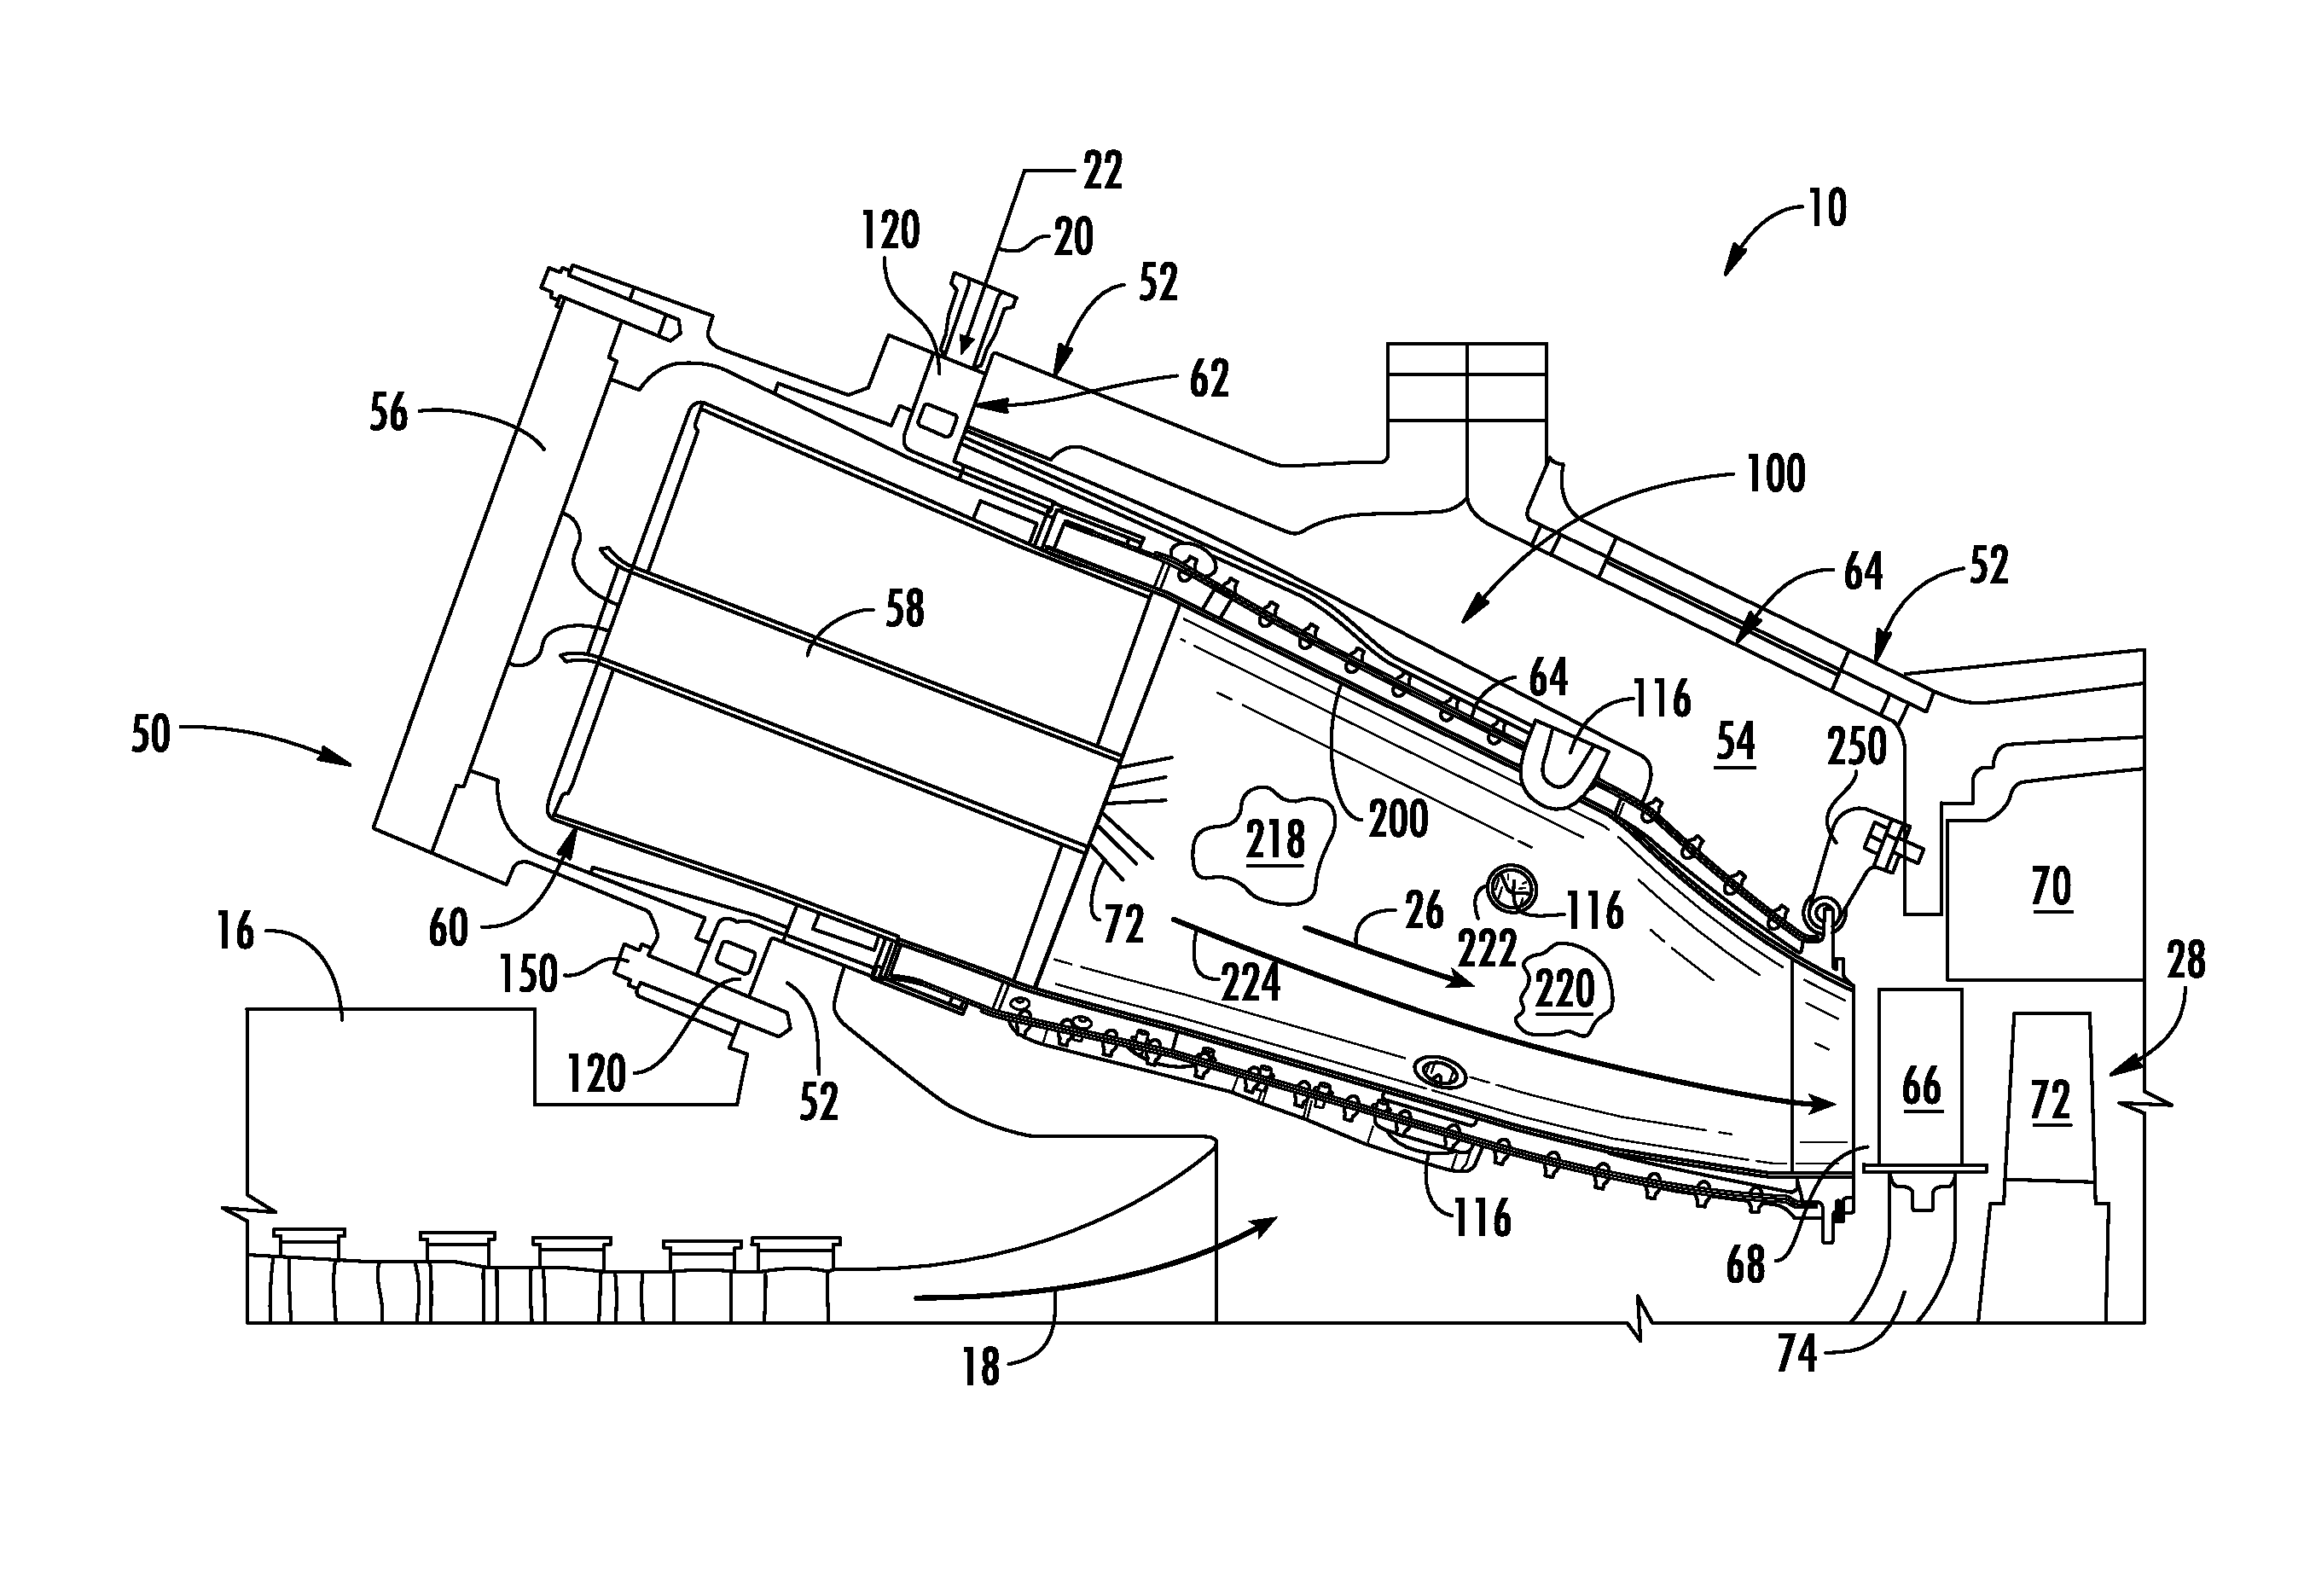 System for providing fuel to a combustor